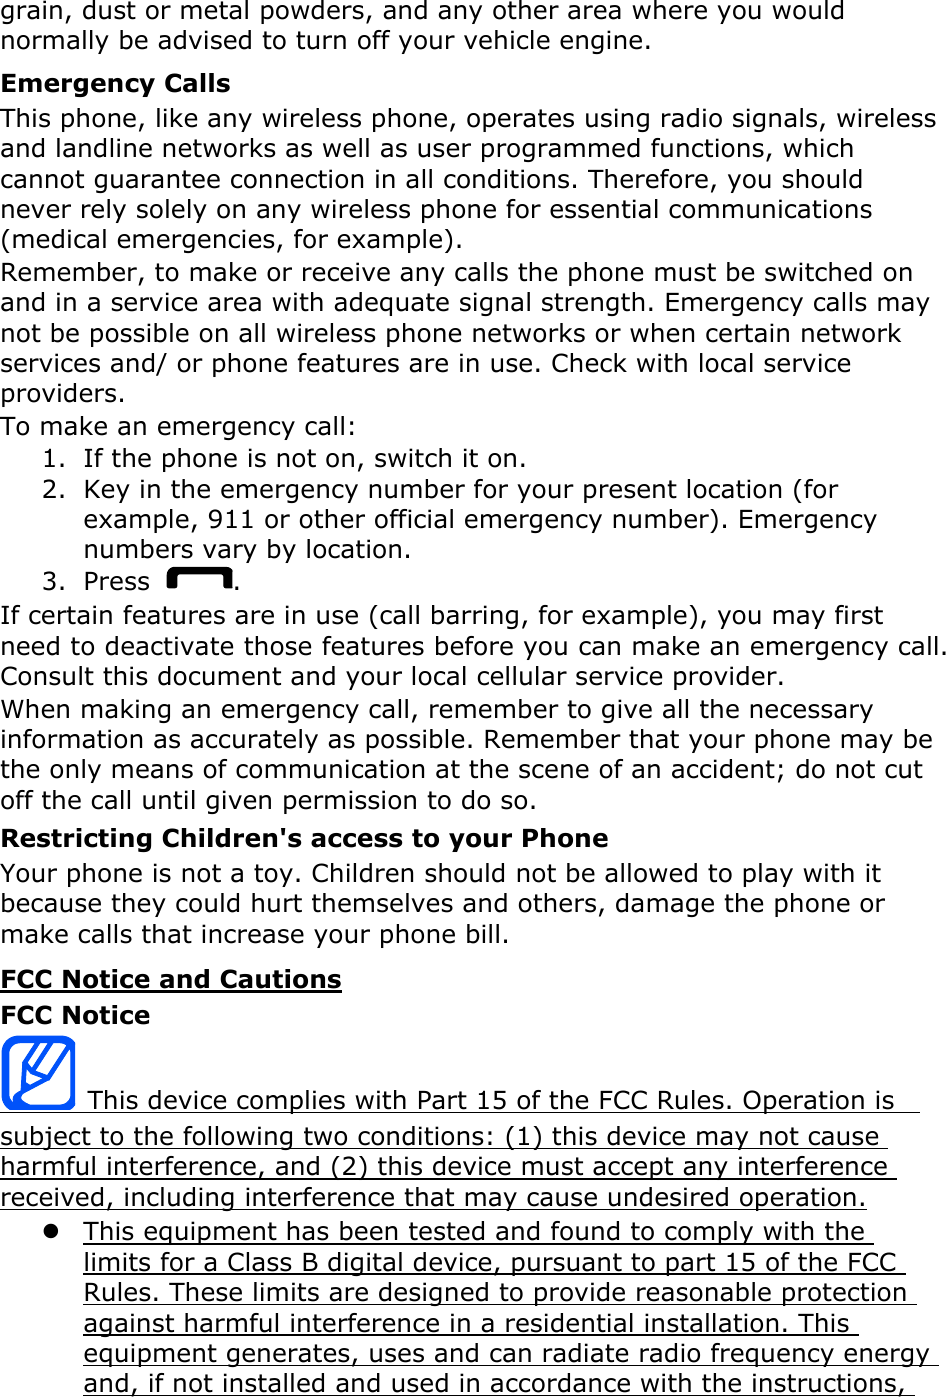 Page 22 of Samsung Electronics Co GTS8600 Cellular/PCS GSM Phone with WLAN and Bluetooth User Manual